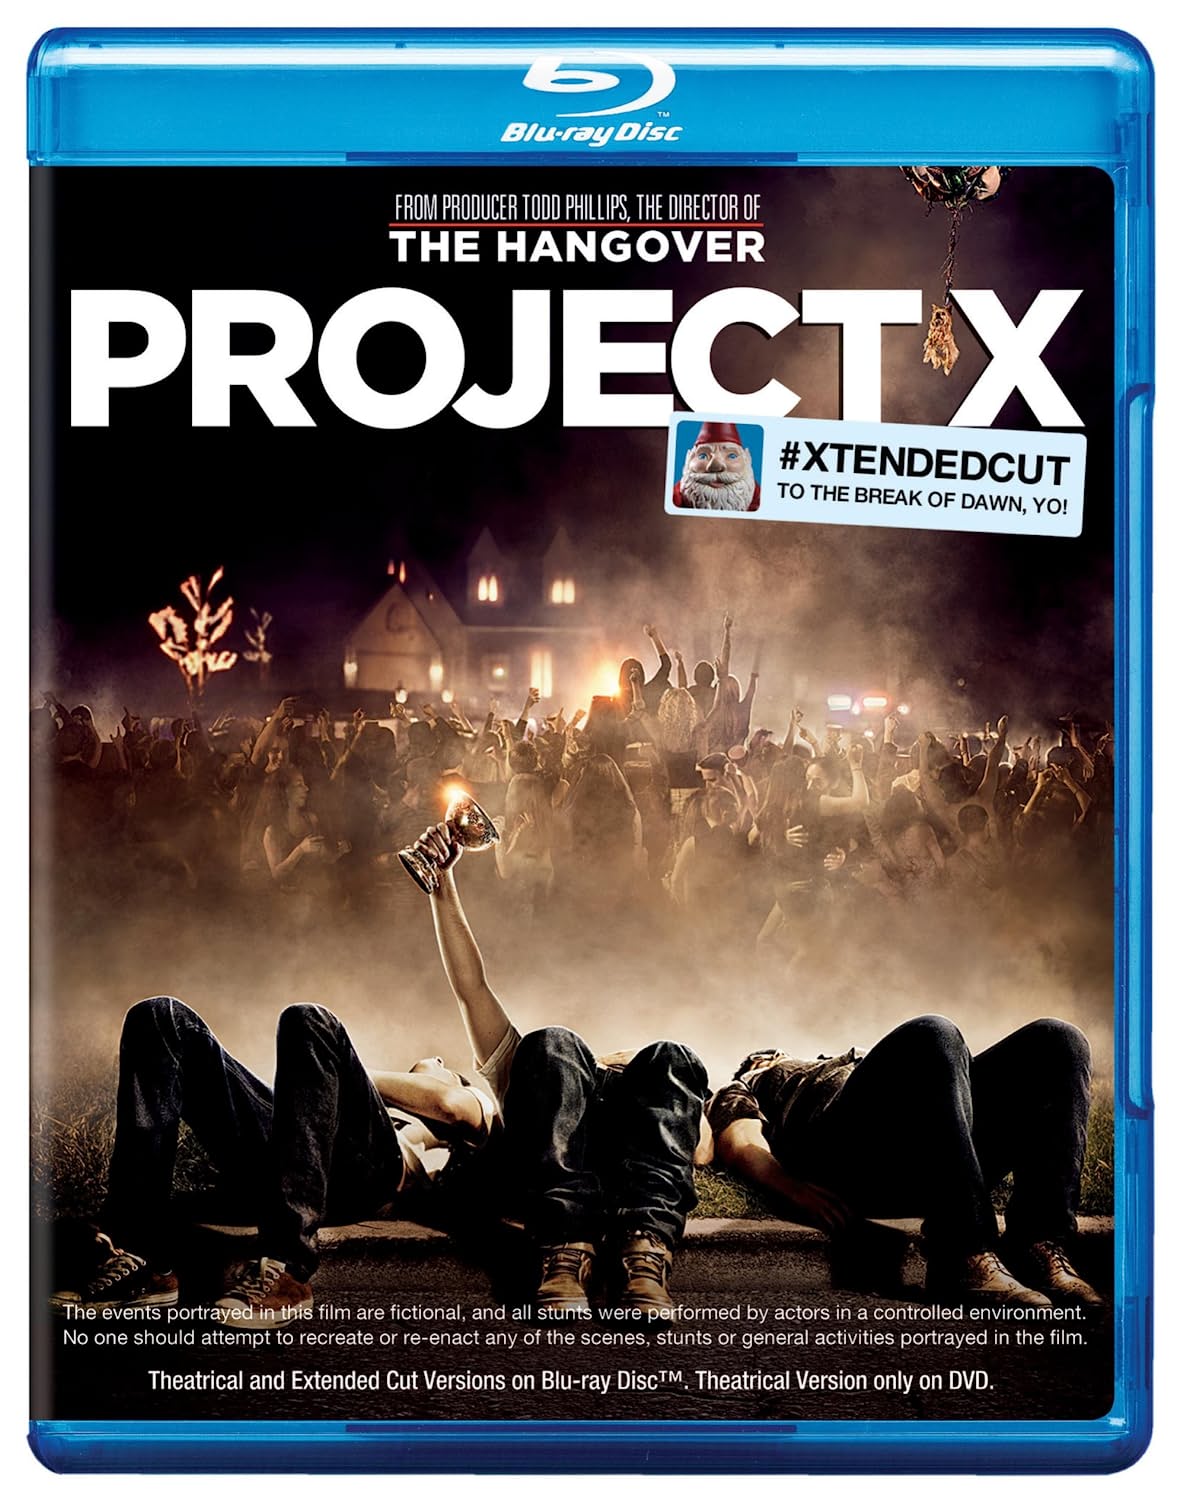 Project X - #Xtendedcut - Blu-ray [ 2012 ]  - Comedy Movies On Blu-ray - Movies On GRUV